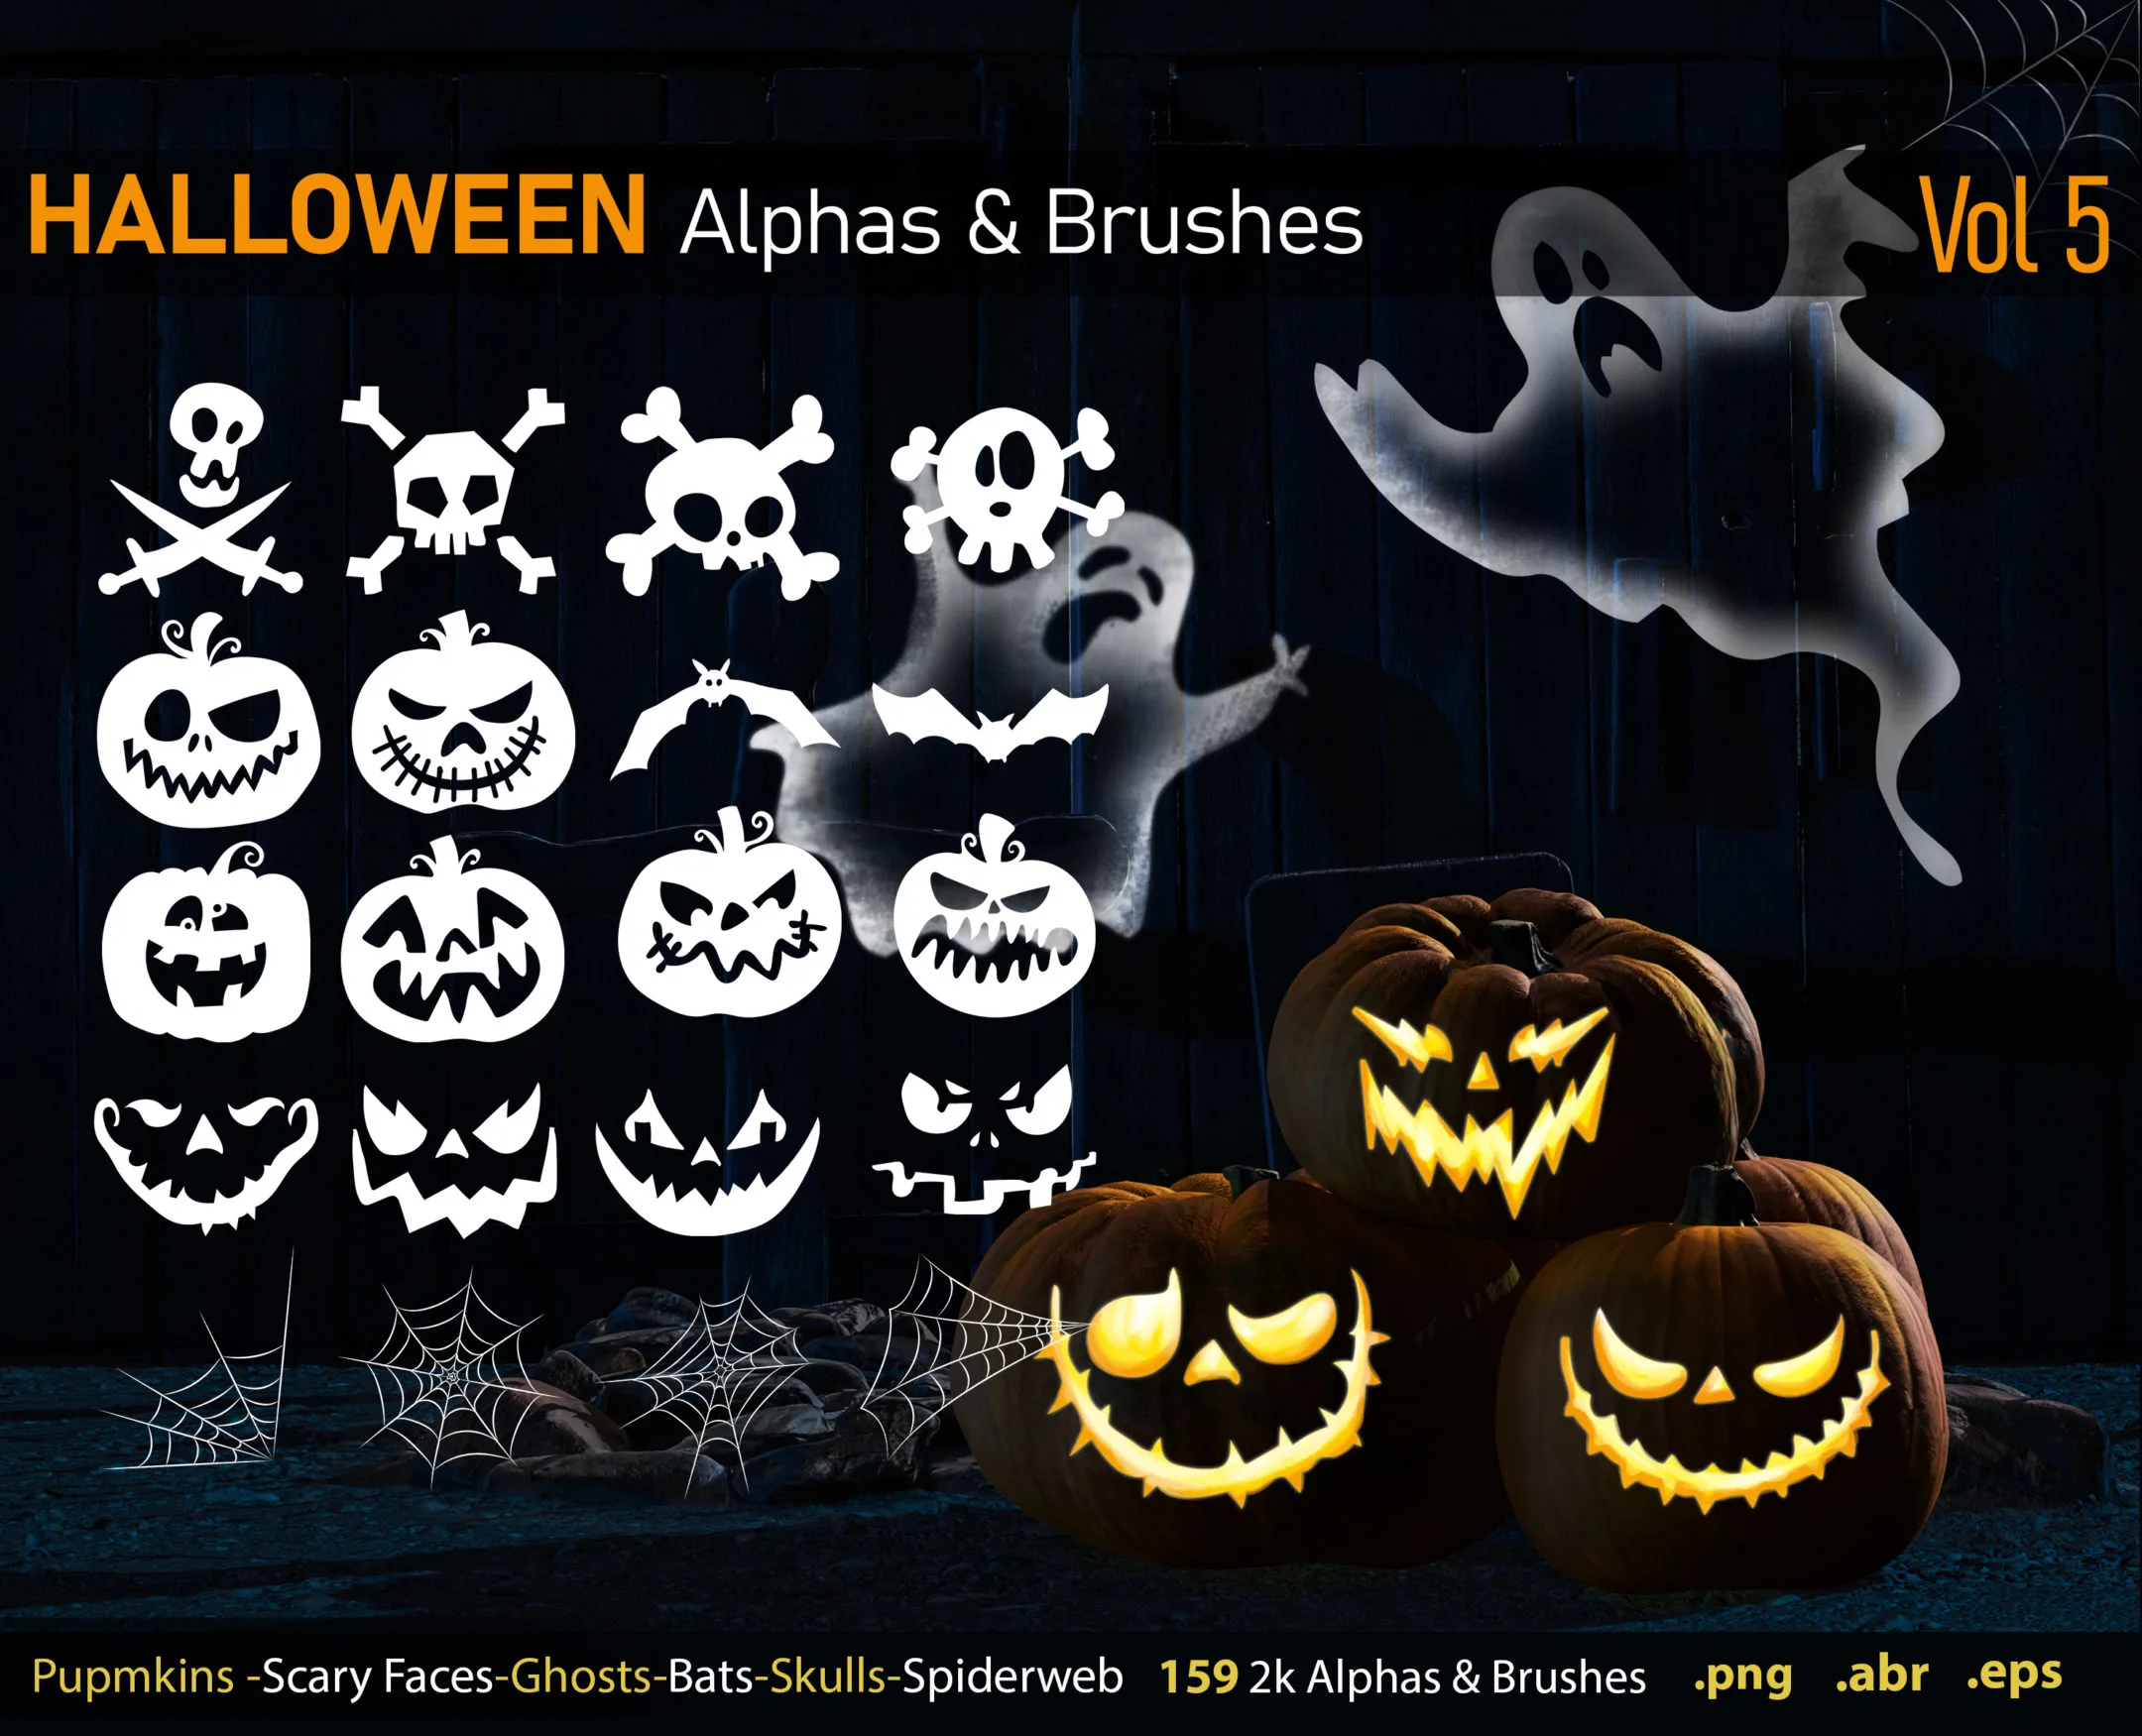 Halloween Alphas & Brushes + eps Files-Vol5